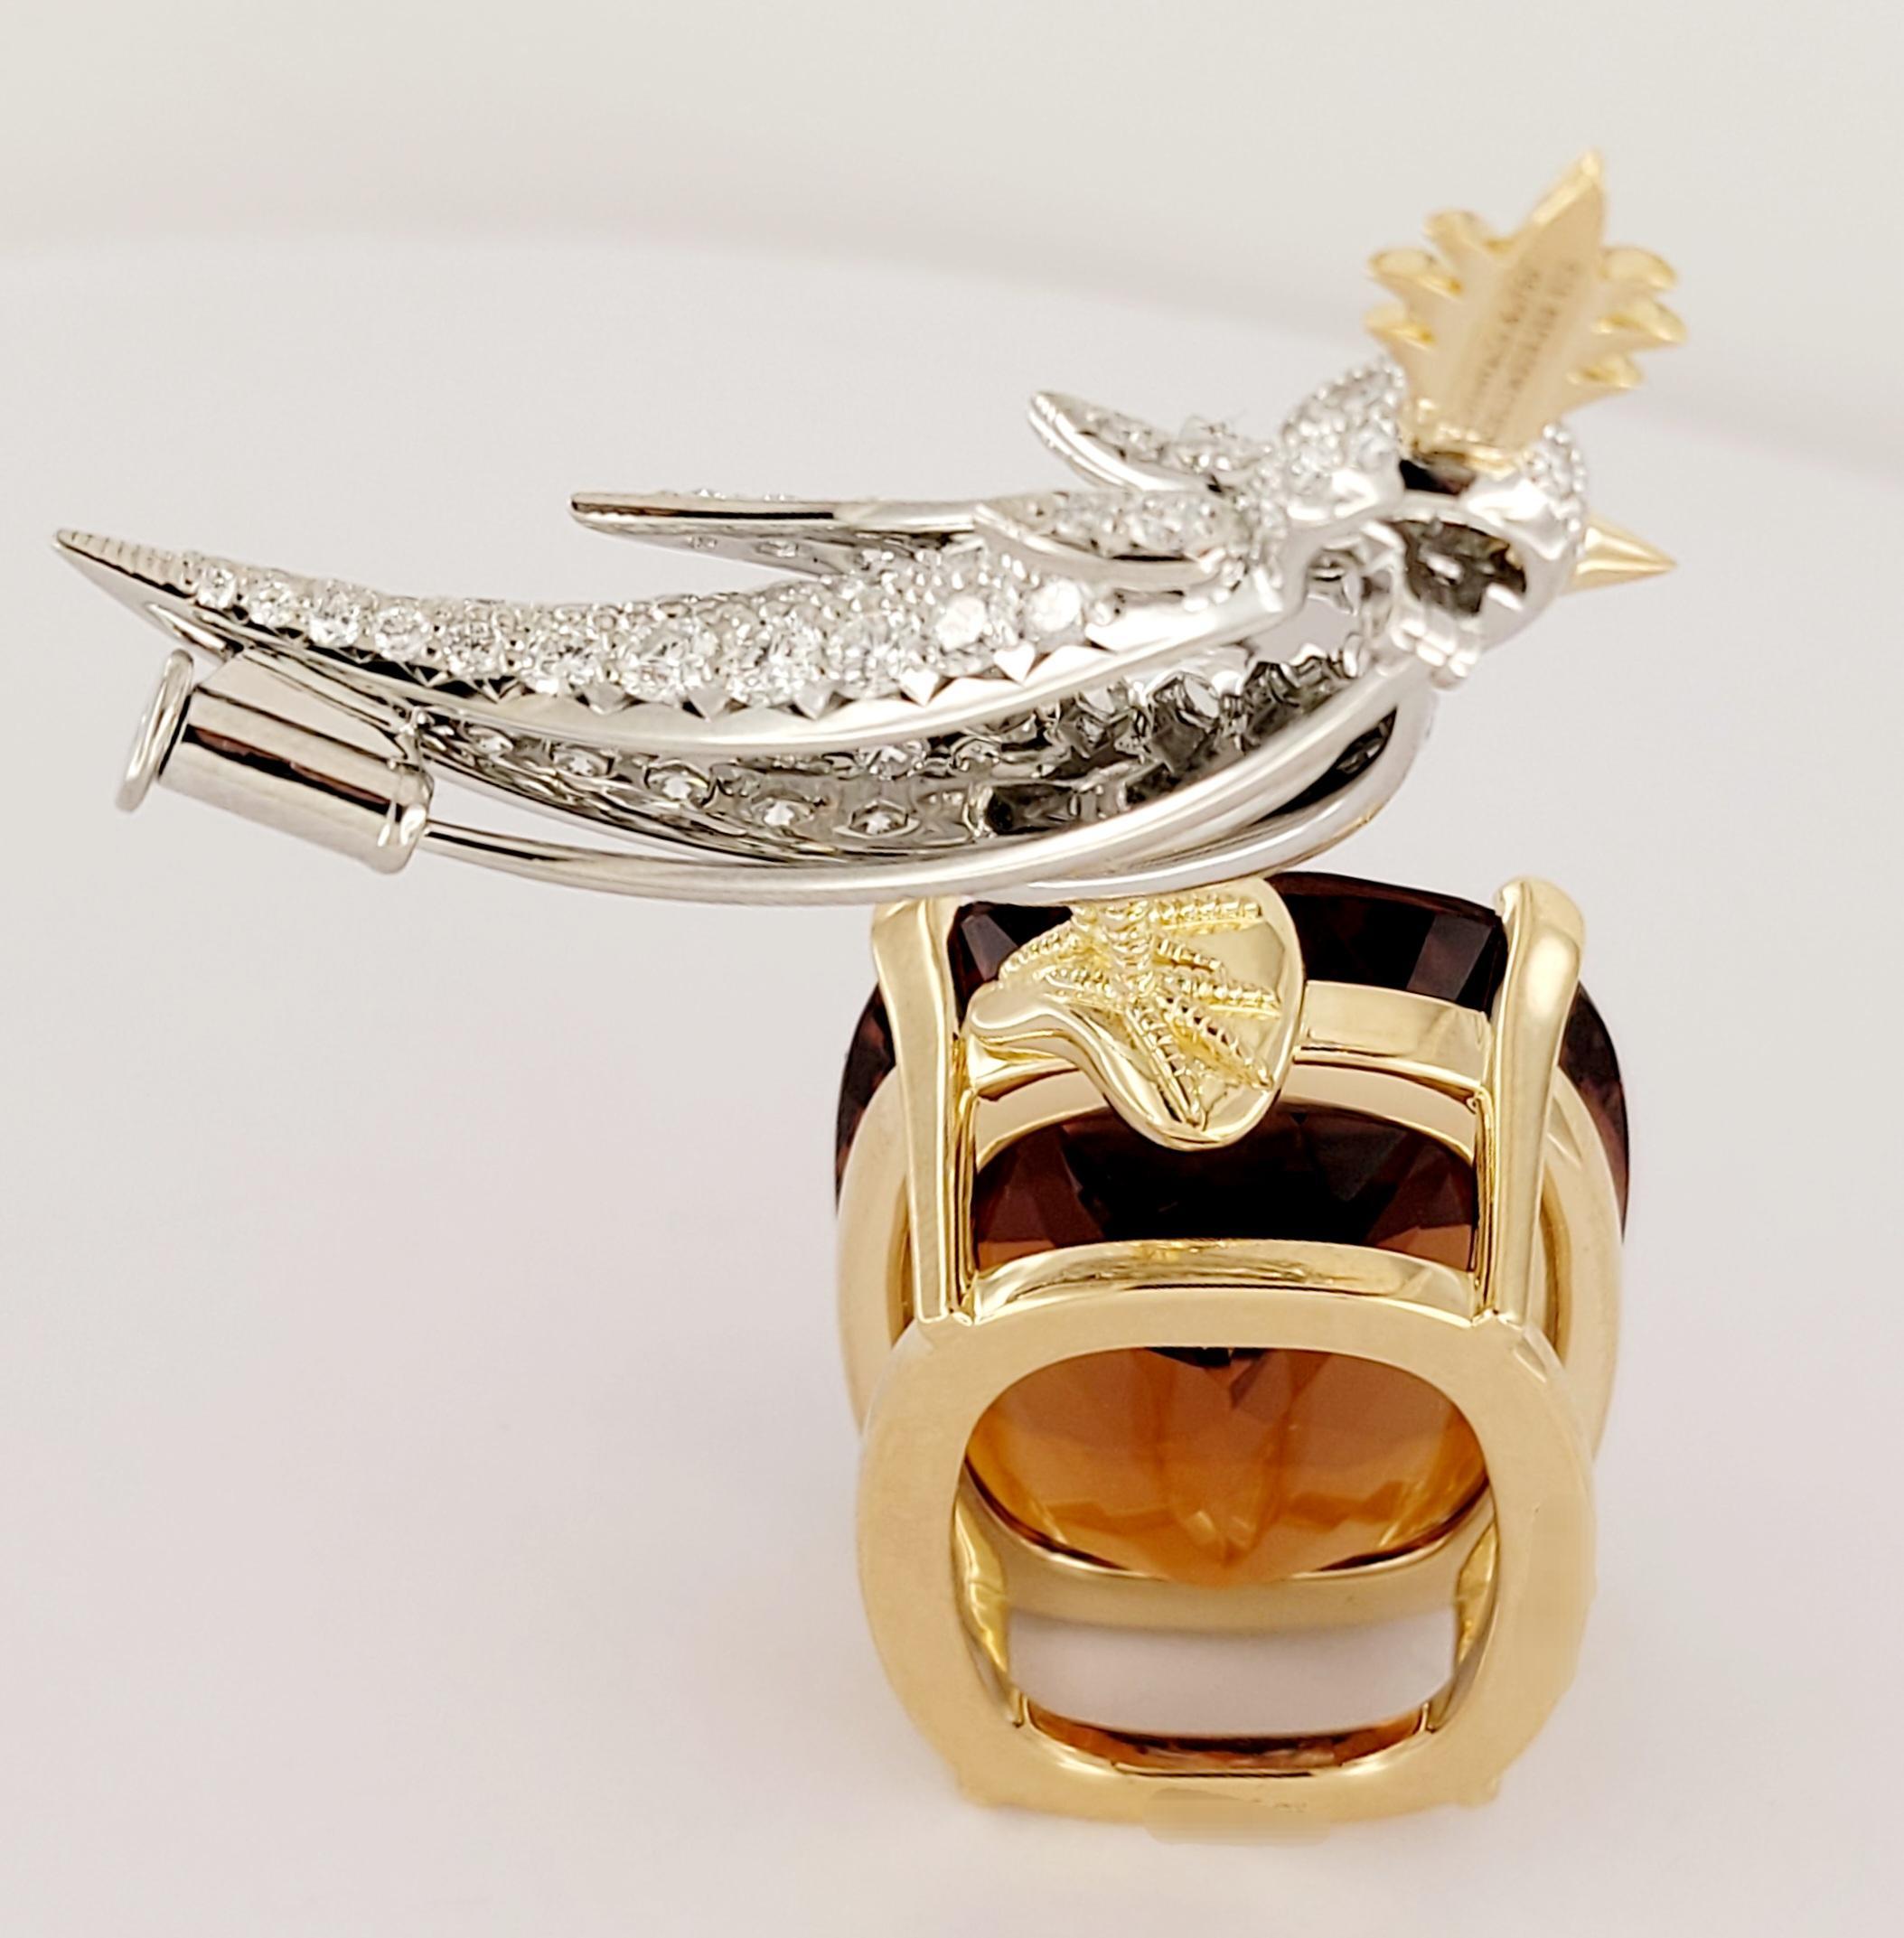 Exceptional rare item. Iconic Bird on a Rock by Tiffany and Co in Large size in Mint Condition. 
Crafted in solid 18K yellow gold, & Platinum for the bird's body.  The Eye has a genuine pink Sapphire, 0.01 carat, round cut & bezel set.   The body of